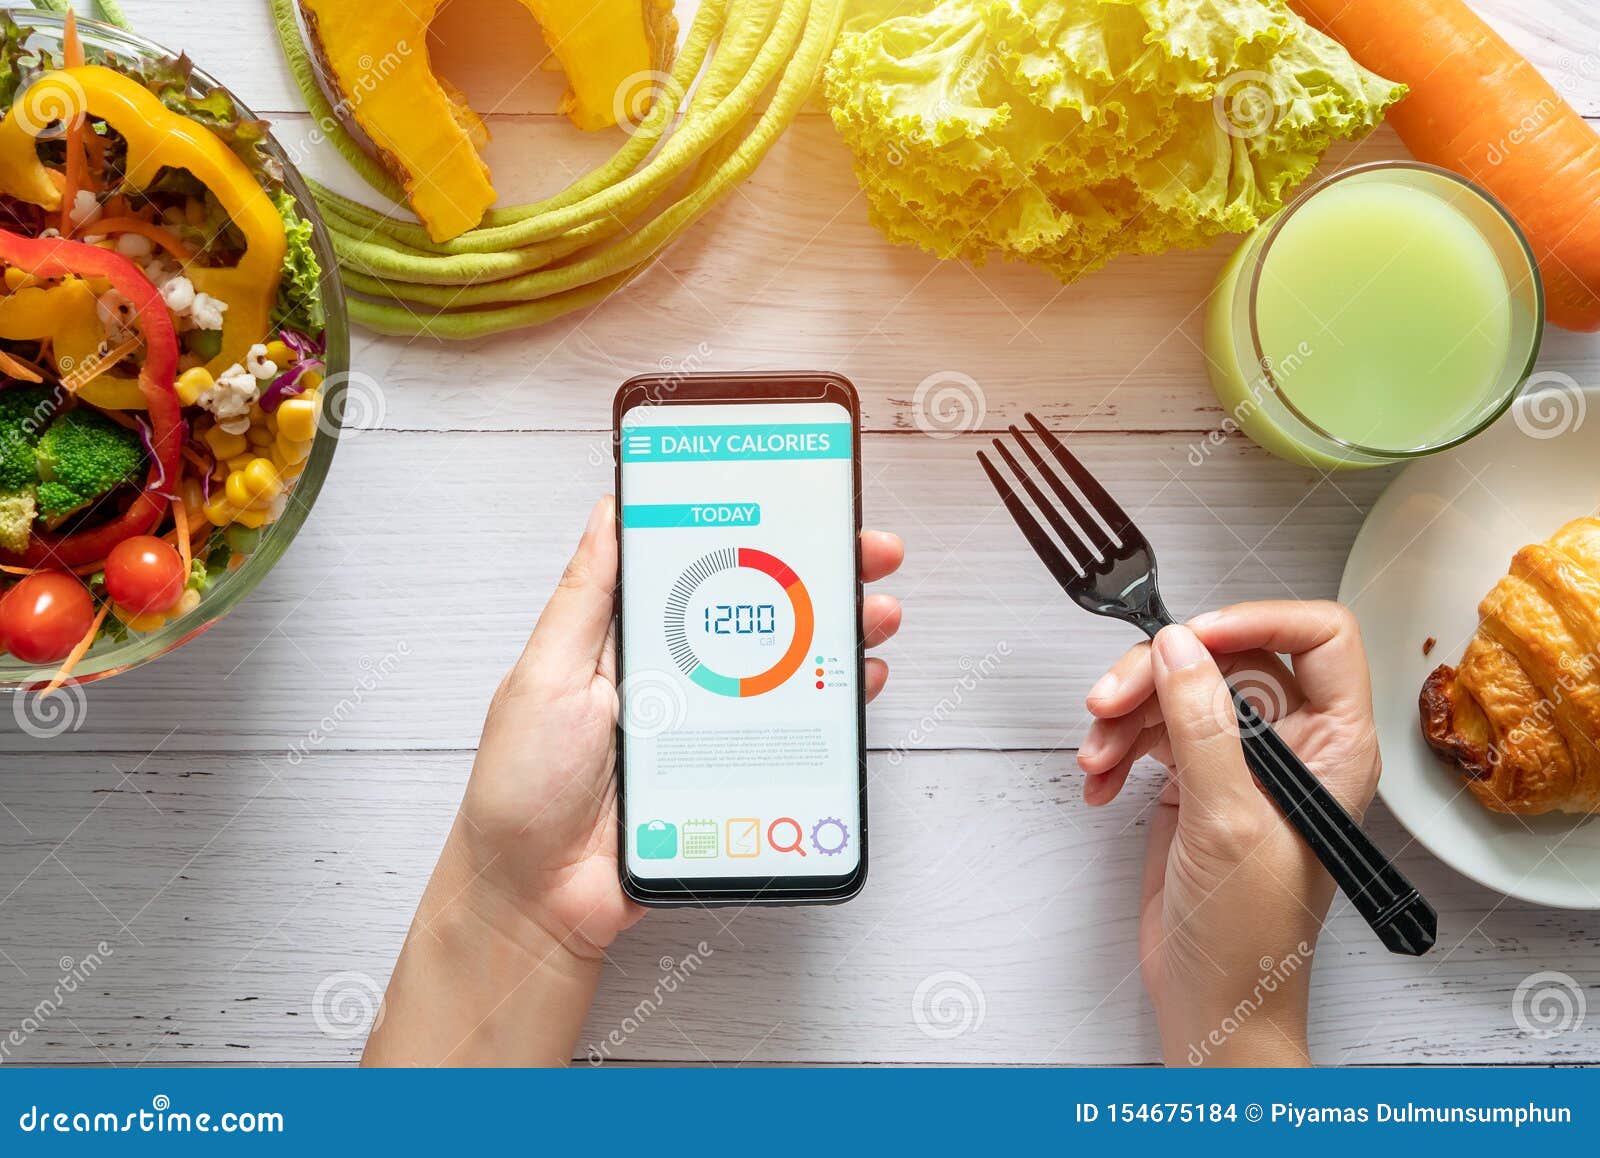 calories counting , diet , food control and weight loss concept. woman using calorie counter application on her smartphone